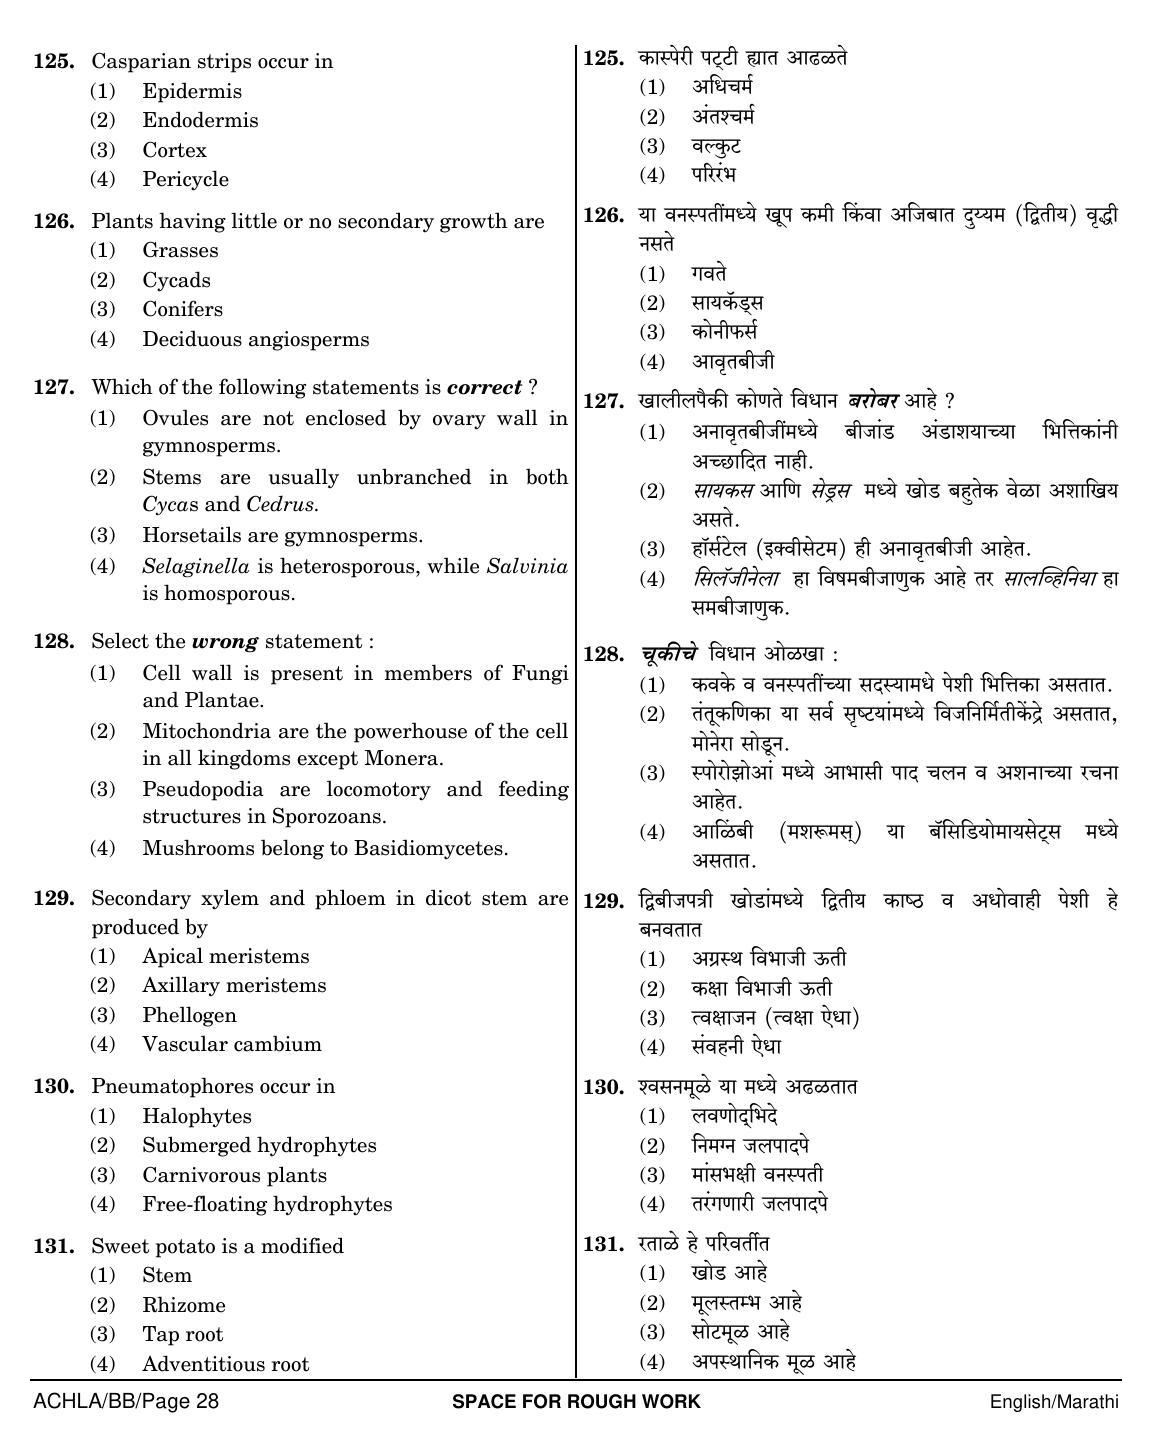 NEET Marathi BB 2018 Question Paper - Page 28